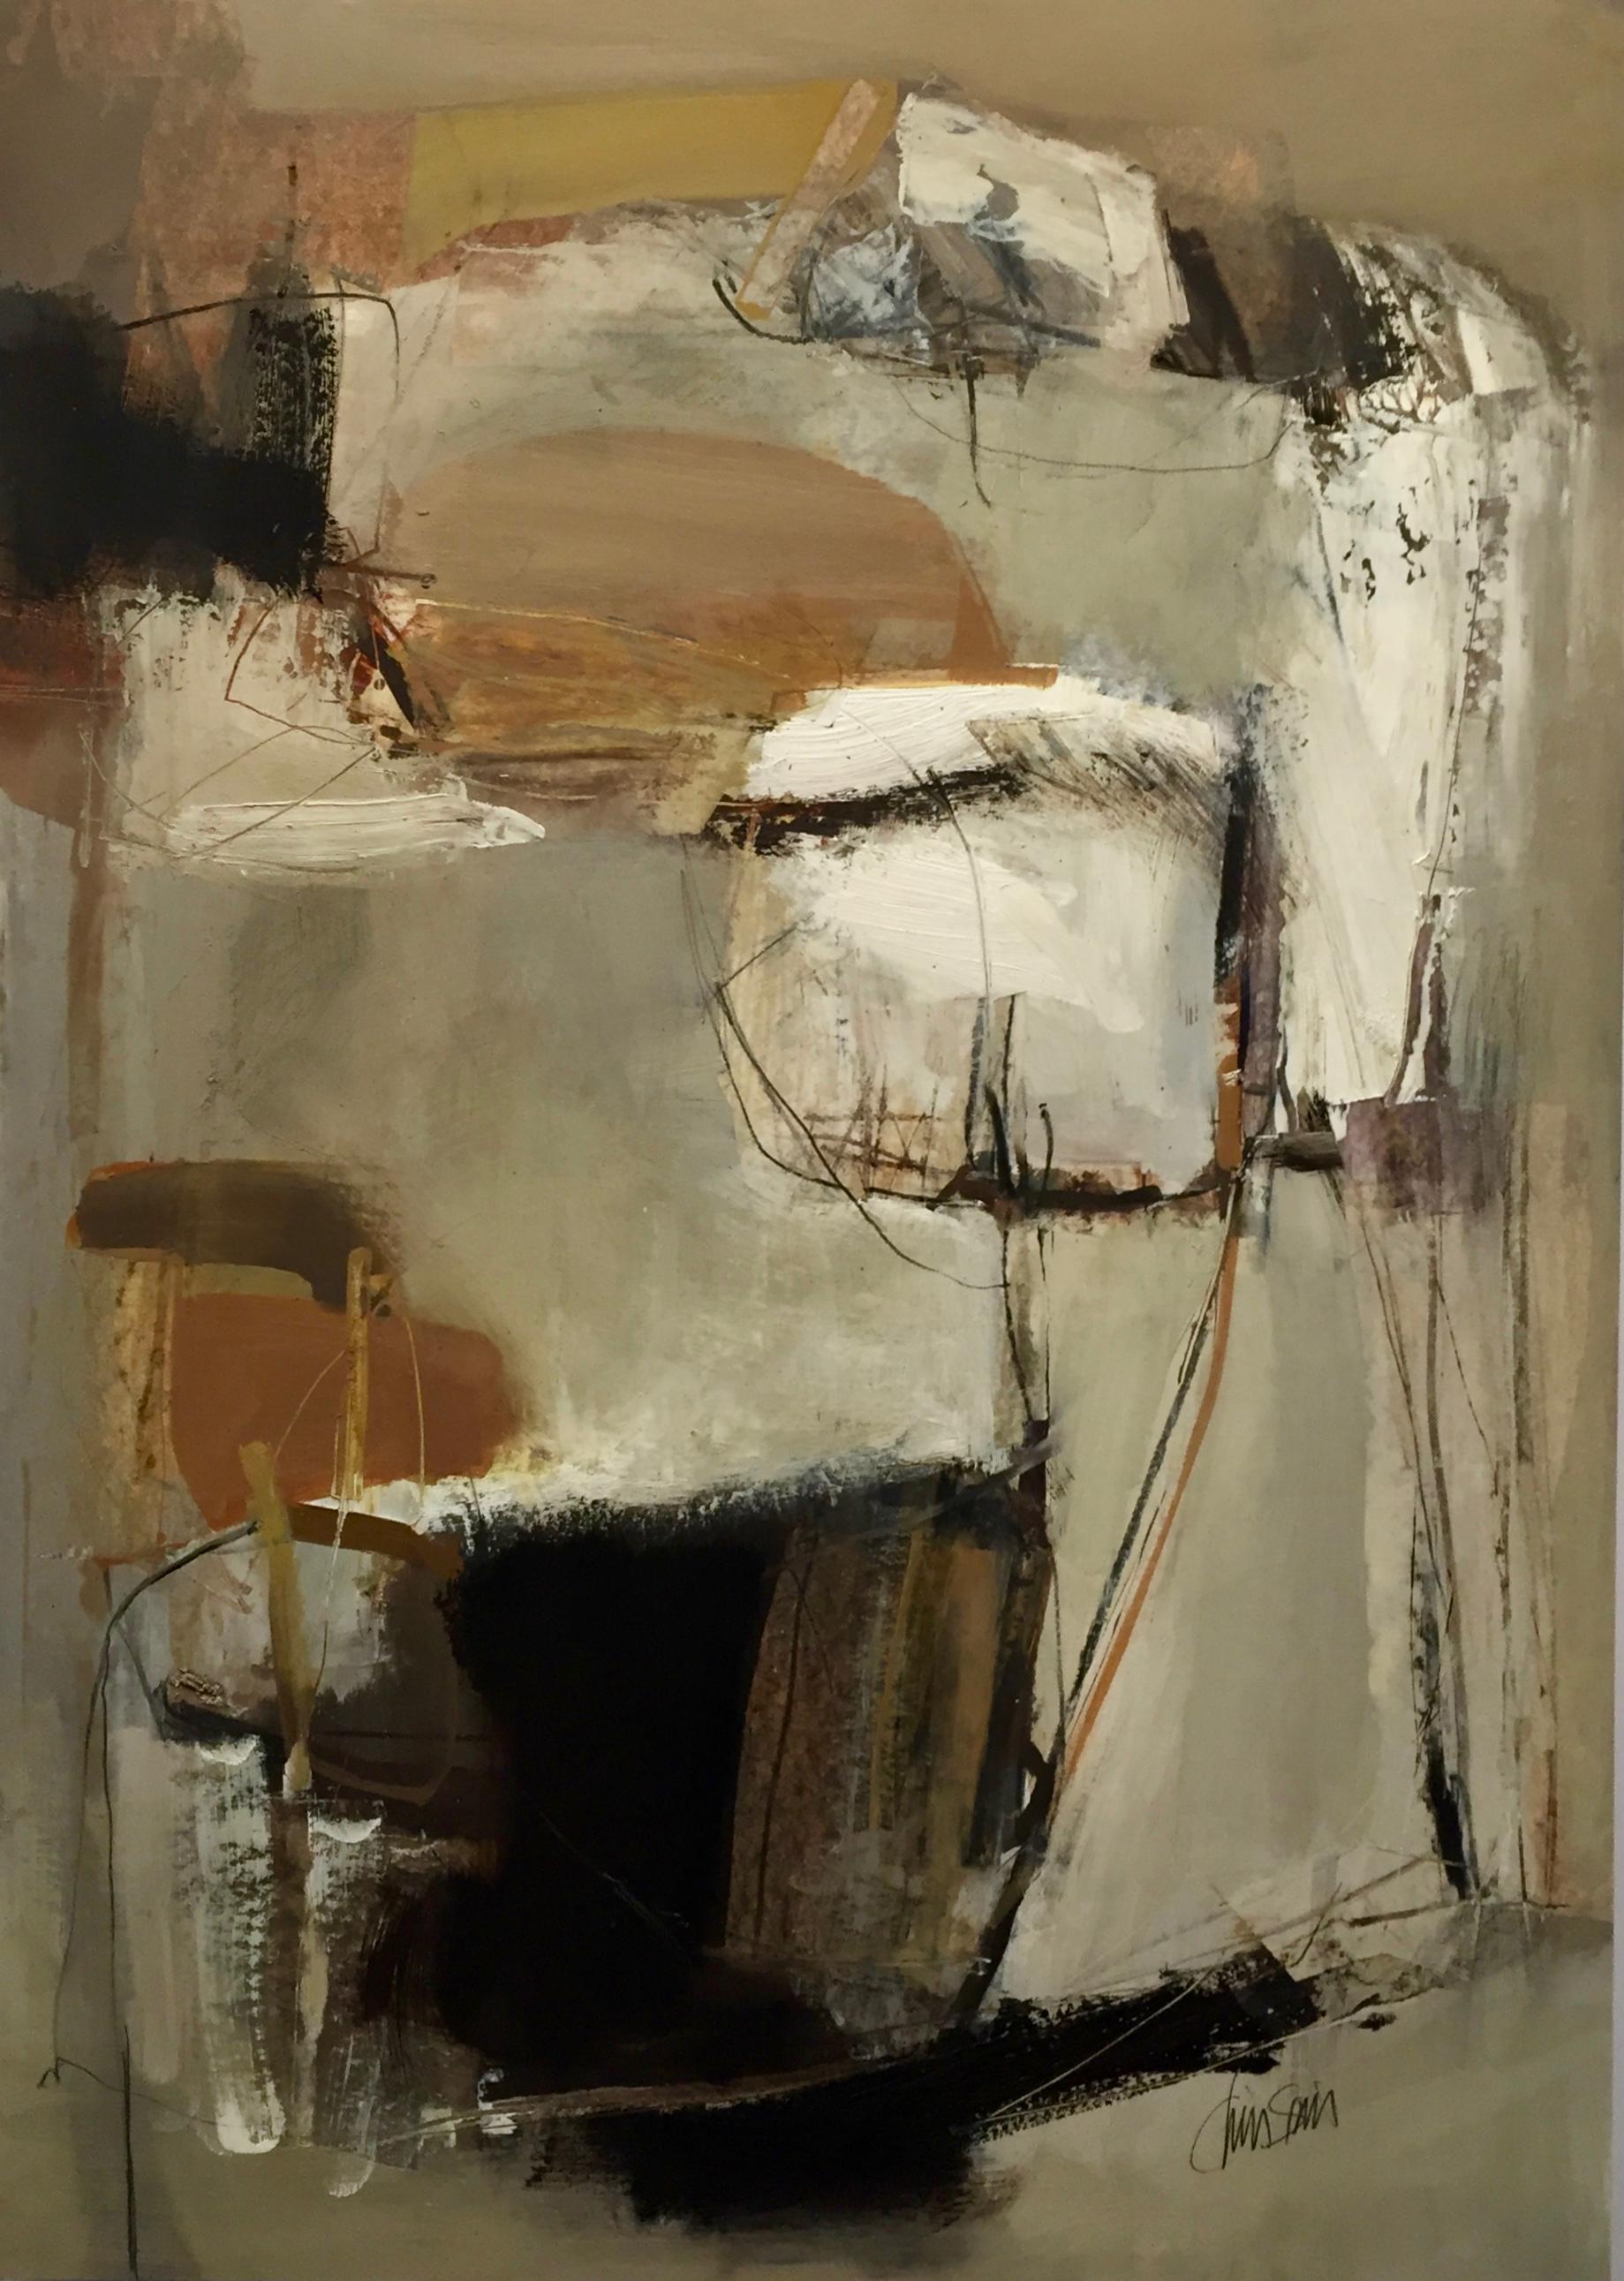 Work on Paper LP7: Abstract Landscape Oil Painting by Chris Sims